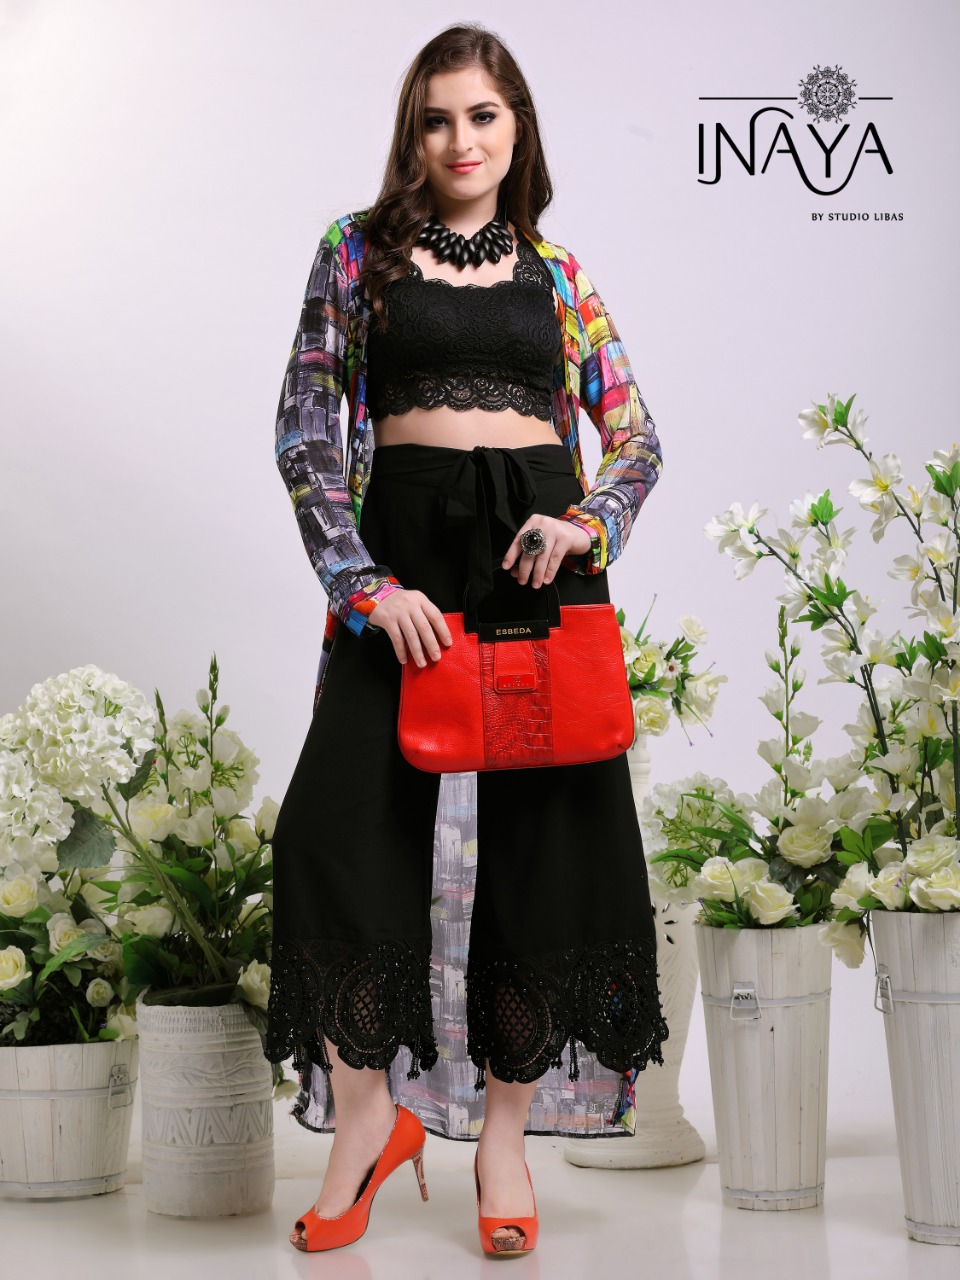 Inaya by studio libas Launch designer culottes pants stylish western wear collection Of pants